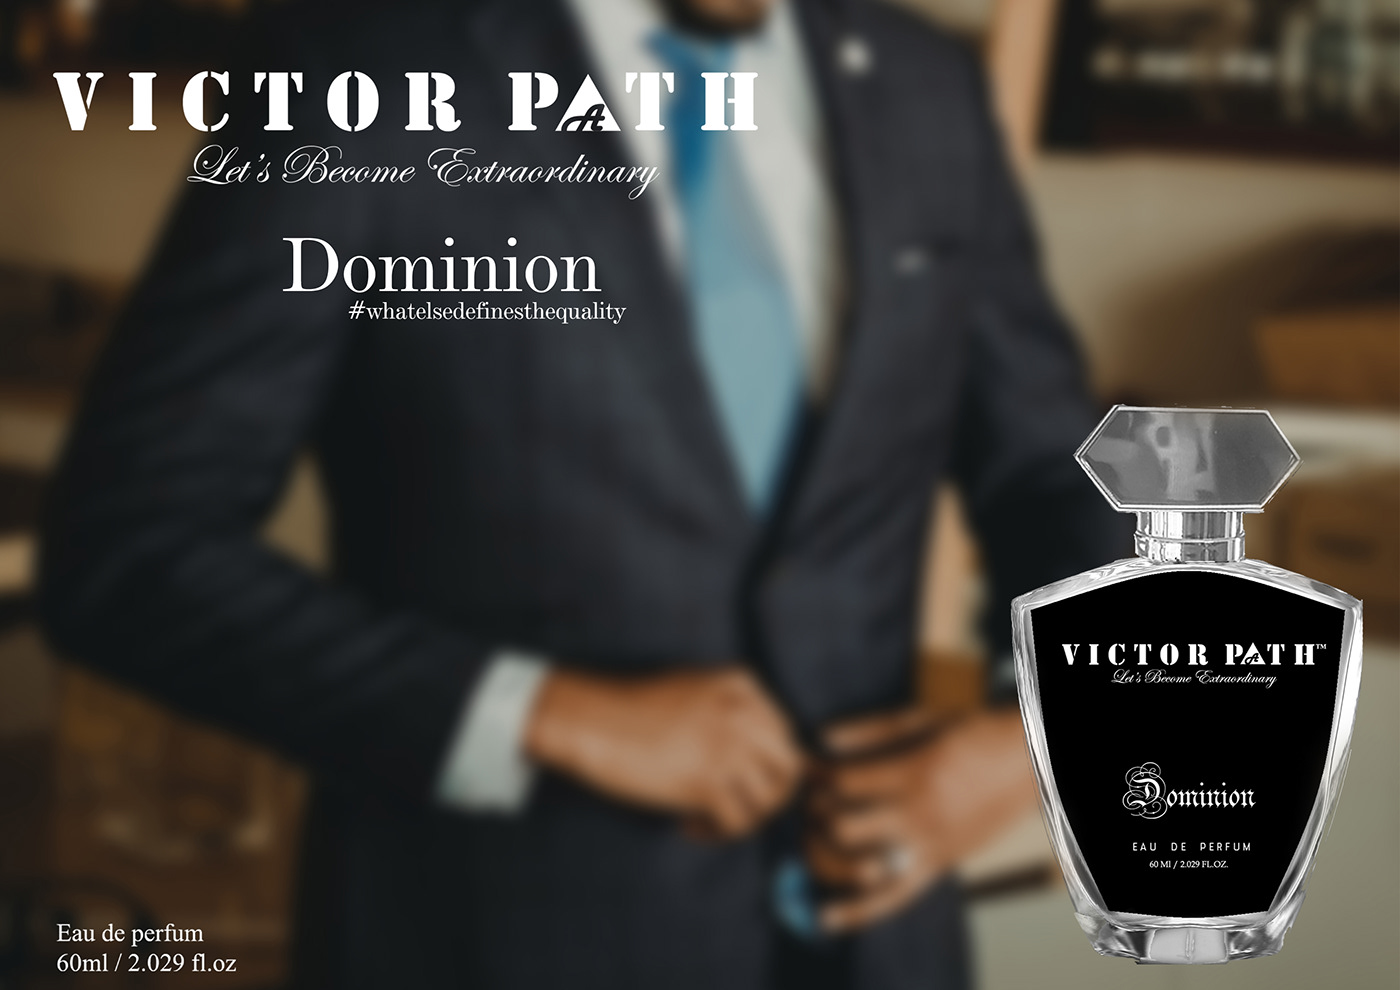 Victor Path | Dominion | Let's Become Extraordinary |